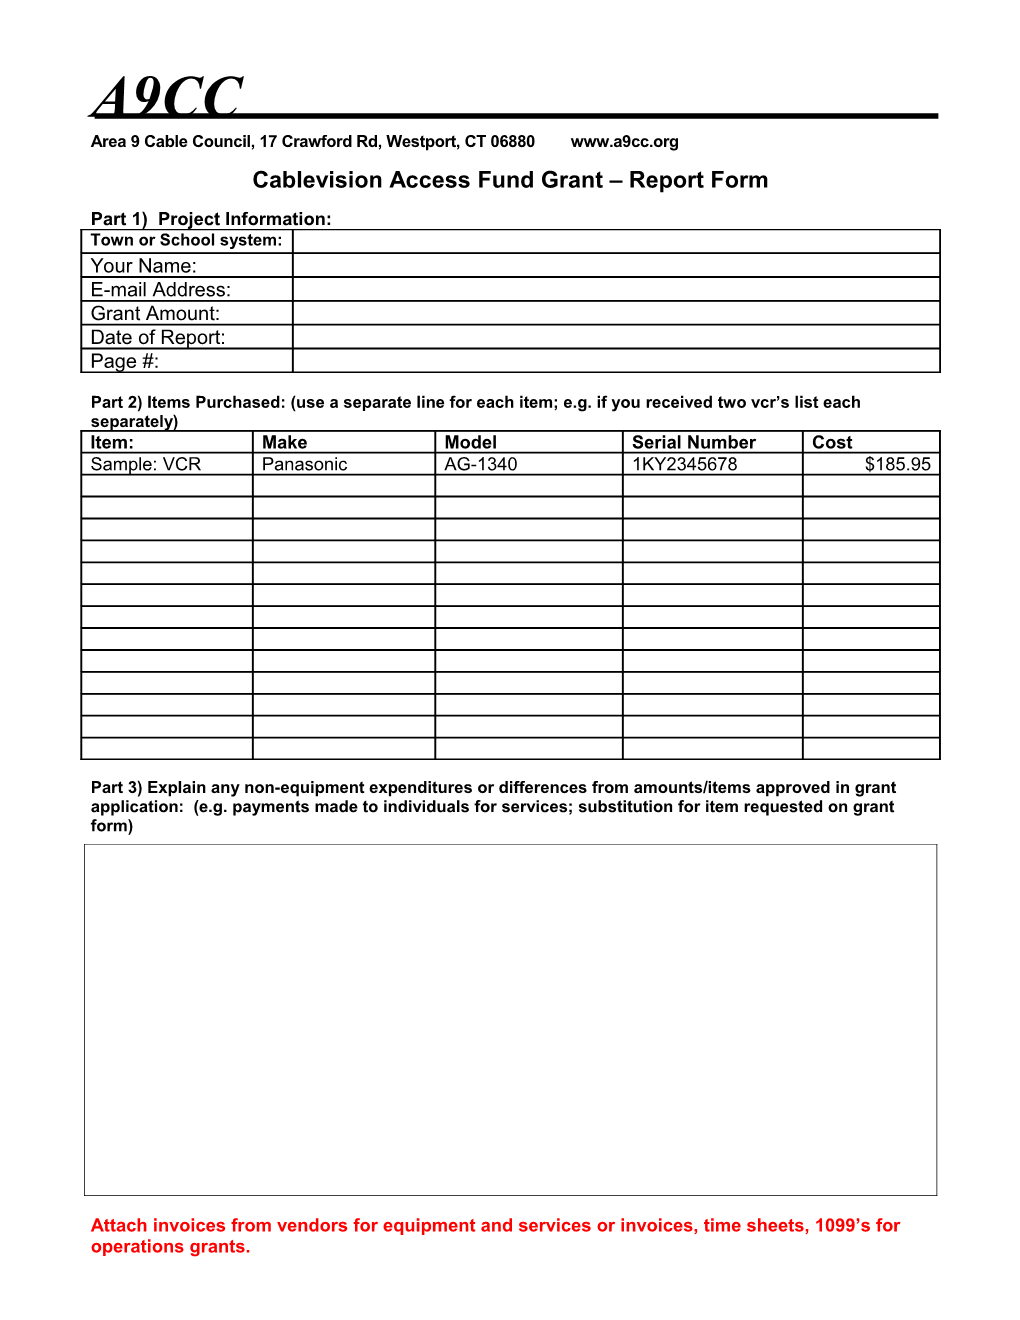 Access Fund Grant Report Form